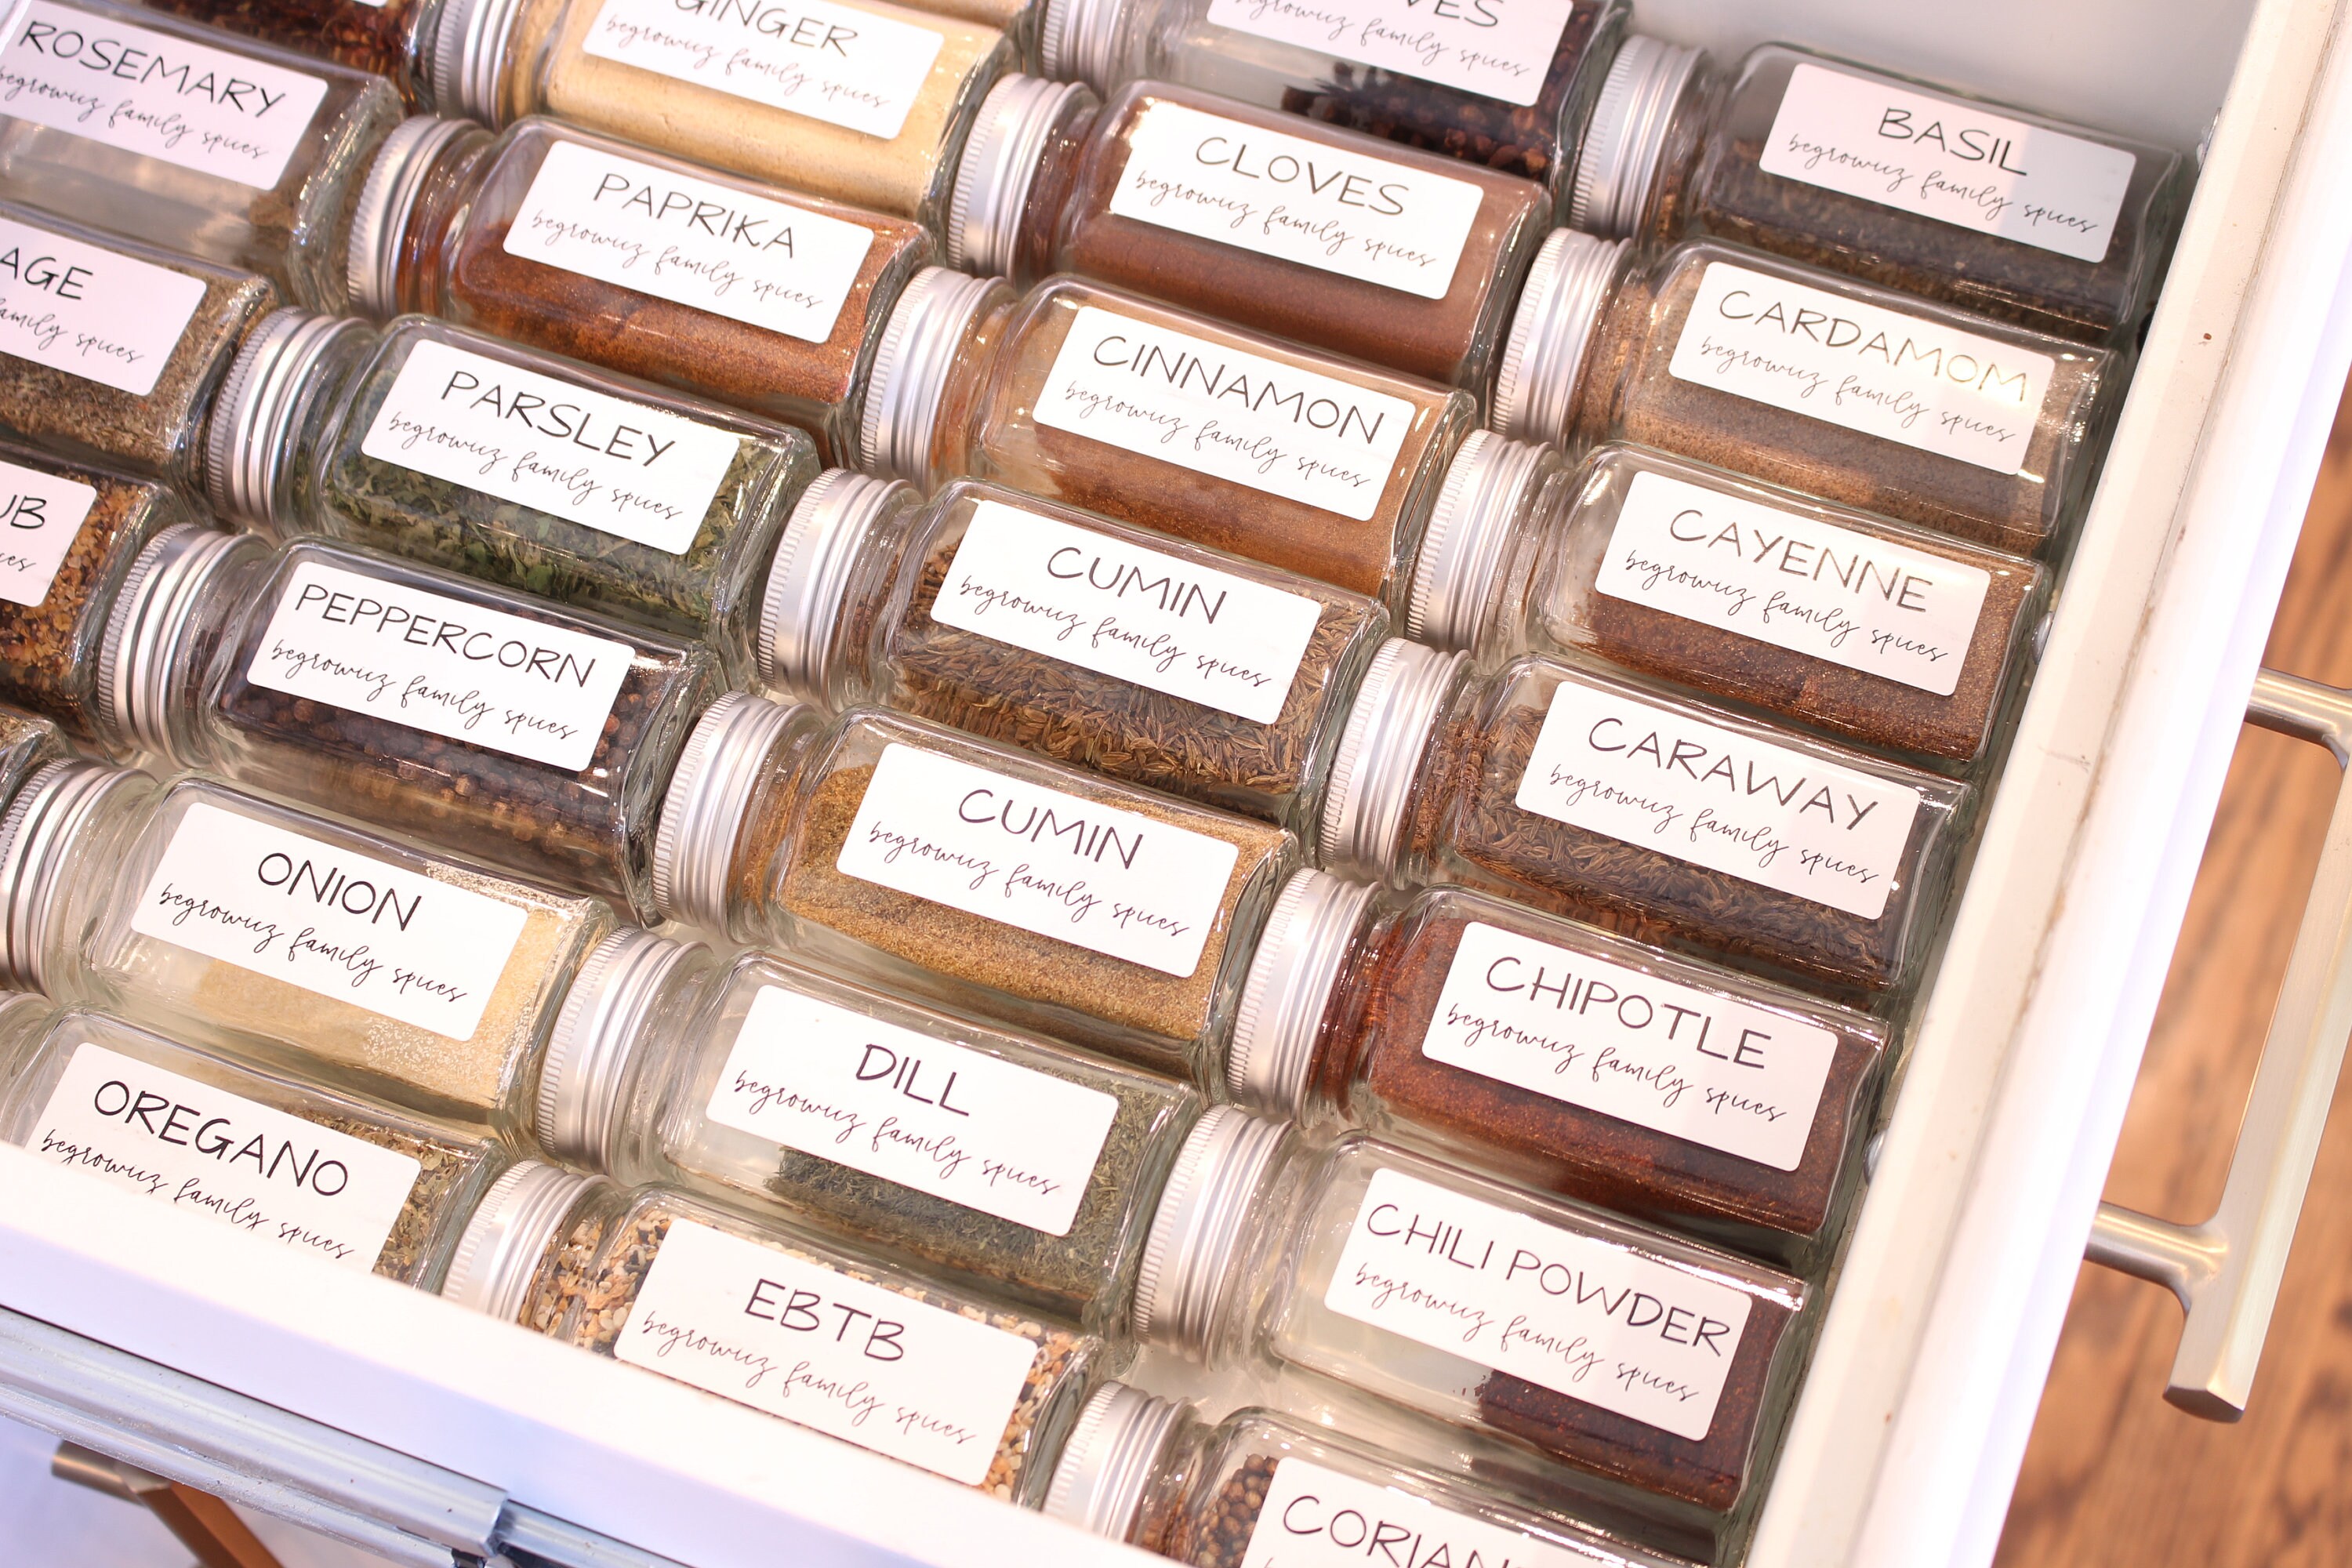 Spice Jar Labels - Pantry Organization Personalized With Family Name Kitchen Storage Seasoning & Herb